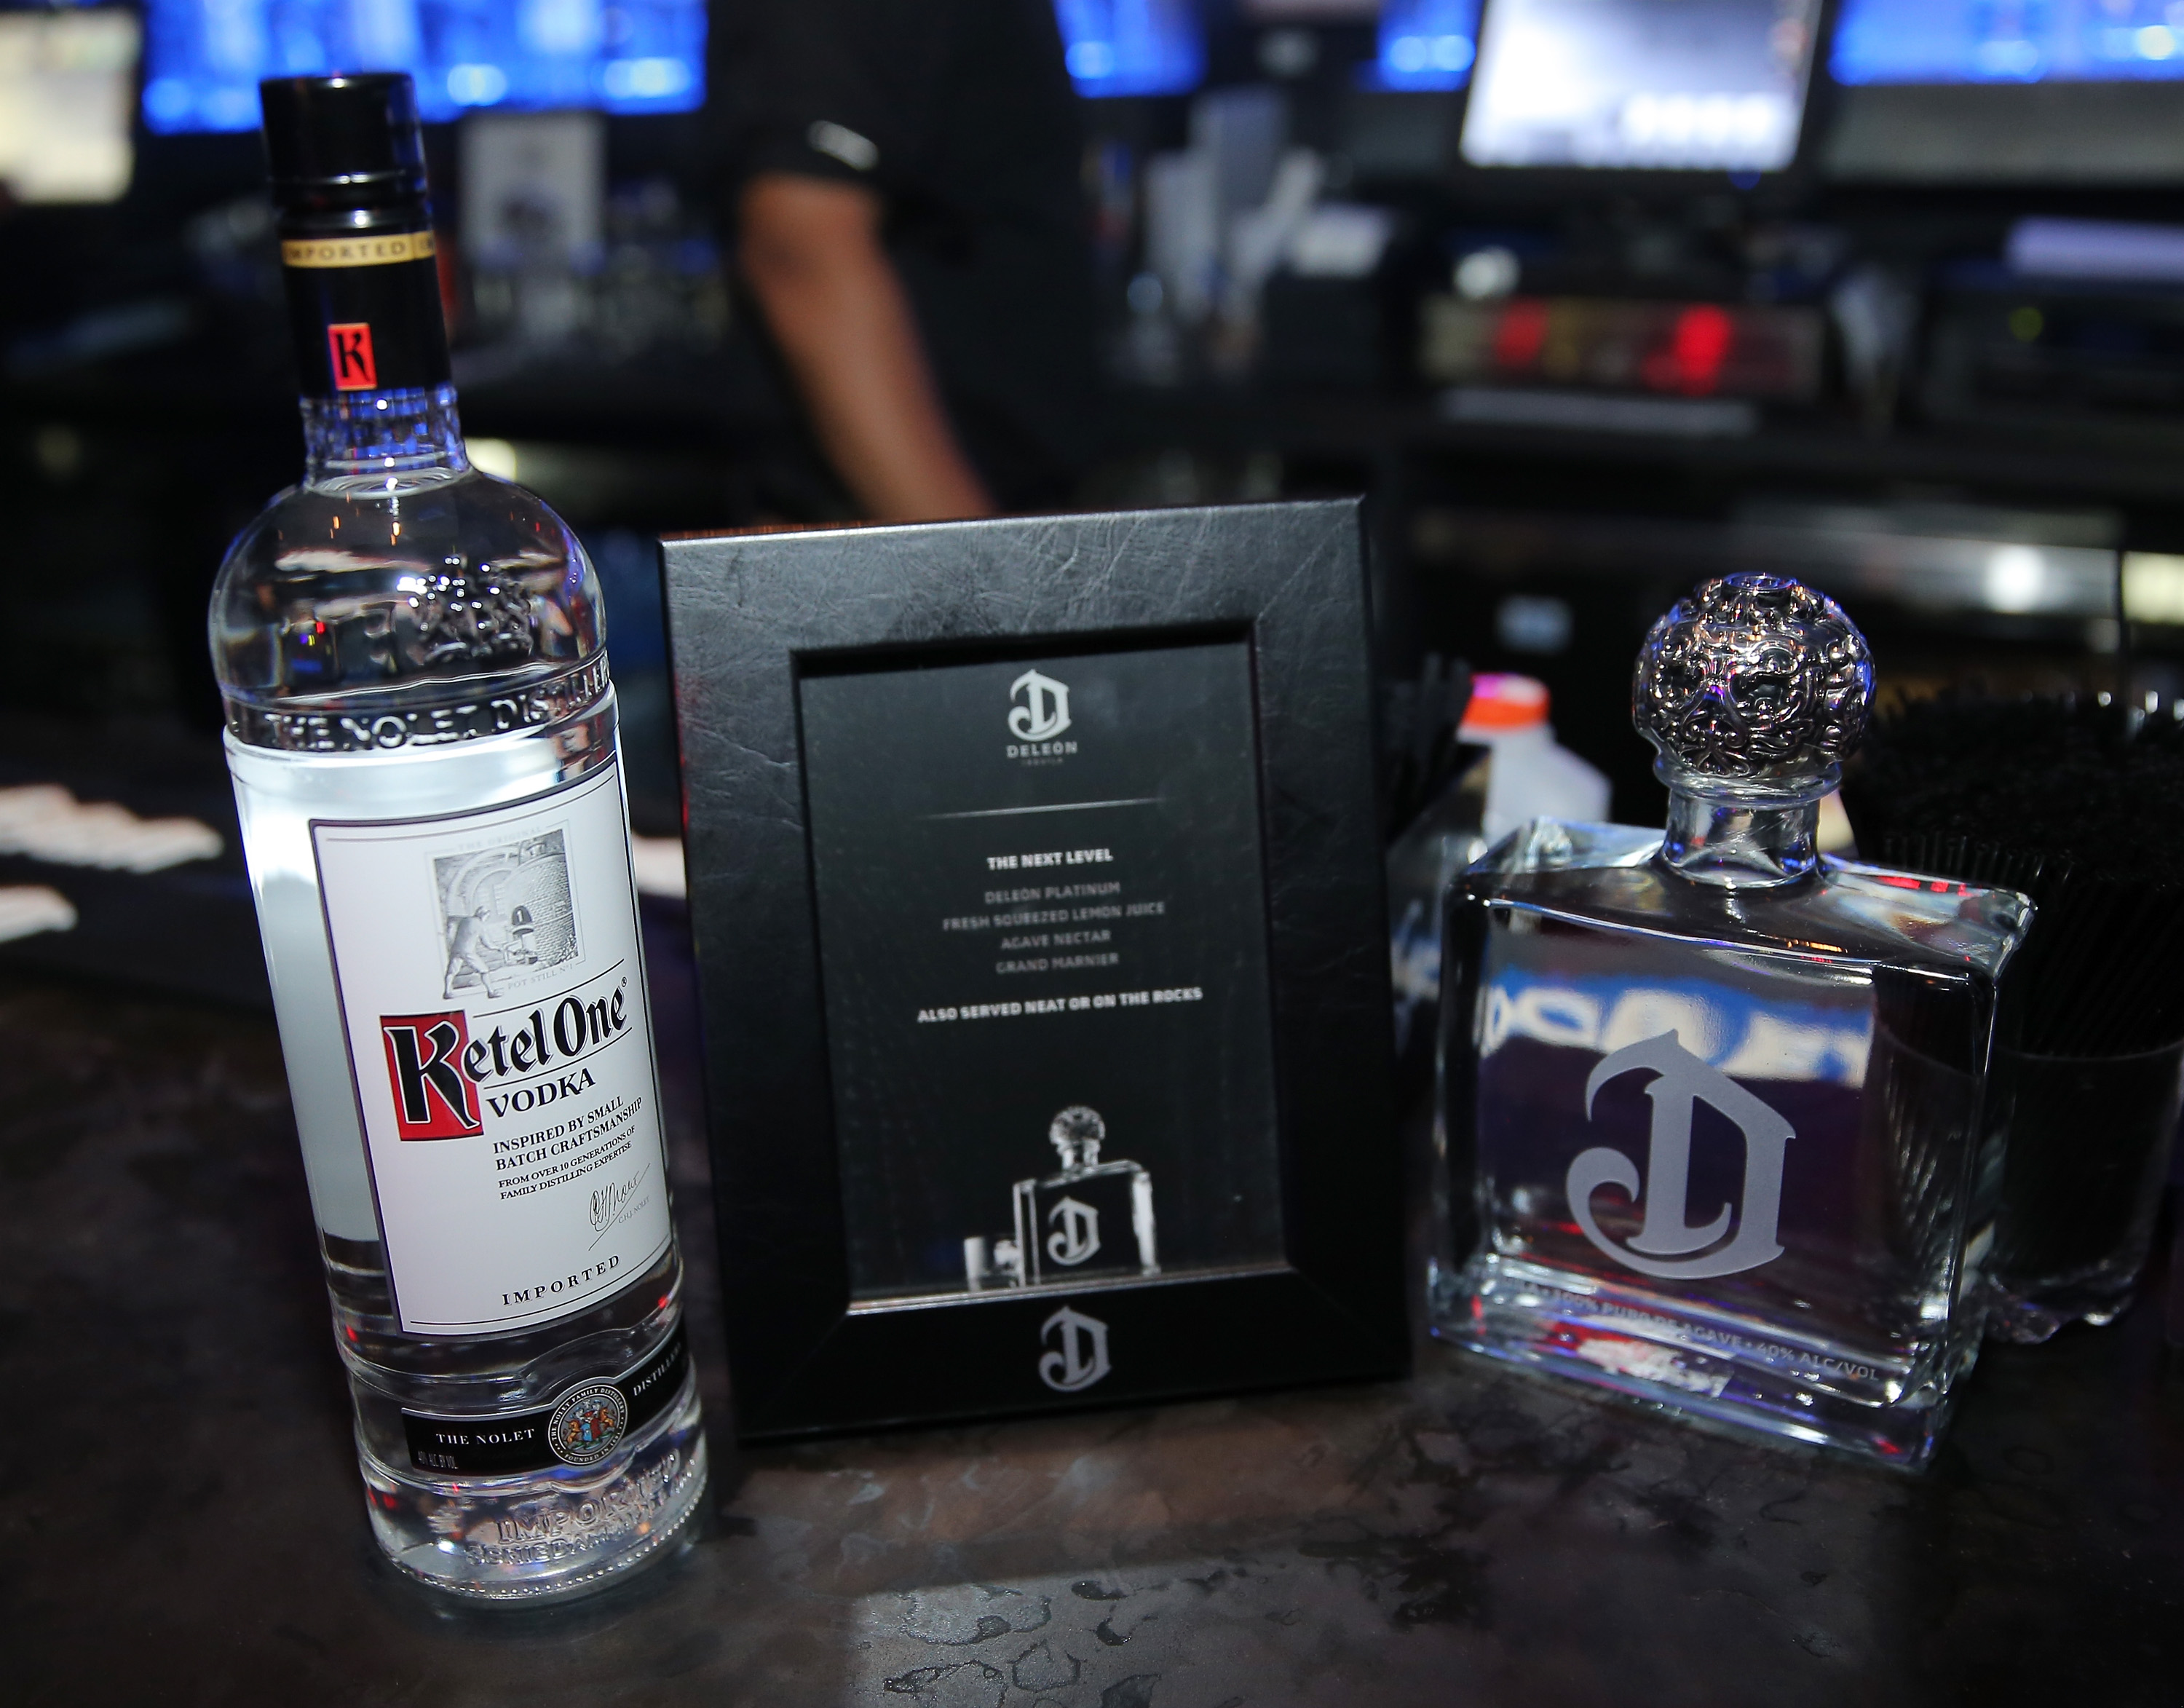 Ketel One Vodka and DeLeon Tequila display at the VFILES MADE FASHION After Party during Mercedes-Benz Fashion Week Fall 2015 at Space Ibiza